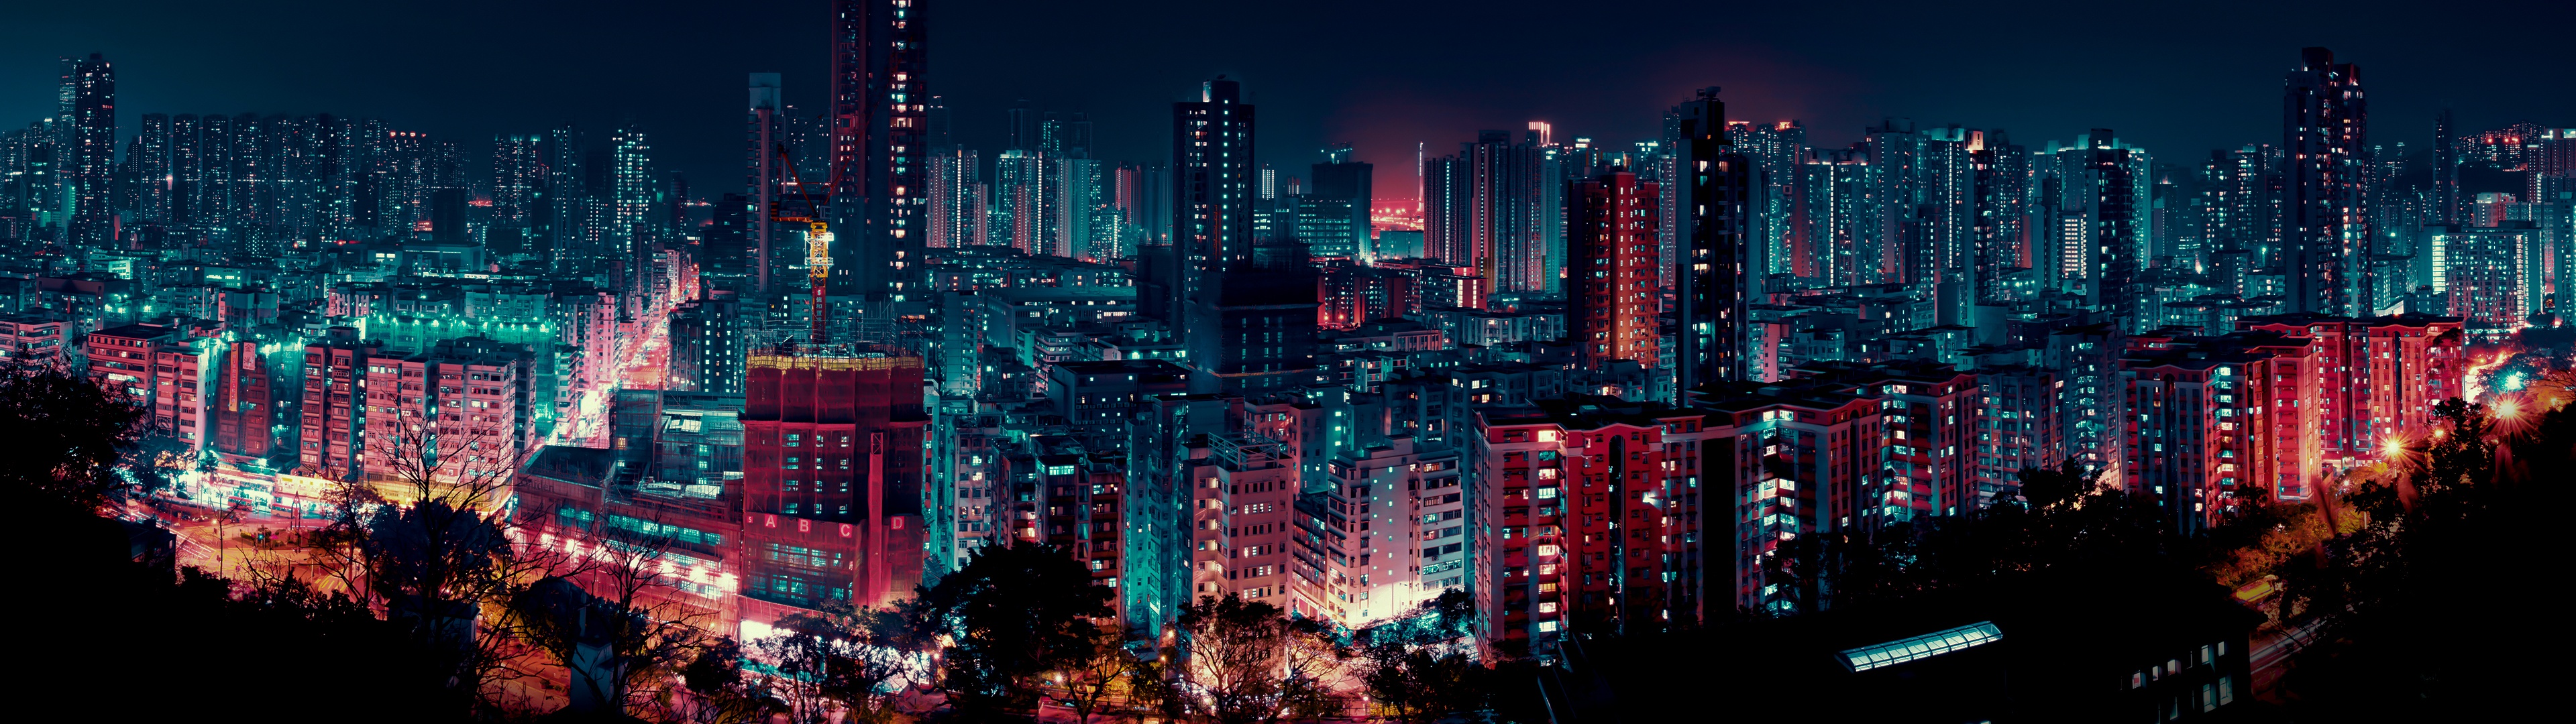 Night City Photos Download The BEST Free Night City Stock Photos  HD  Images